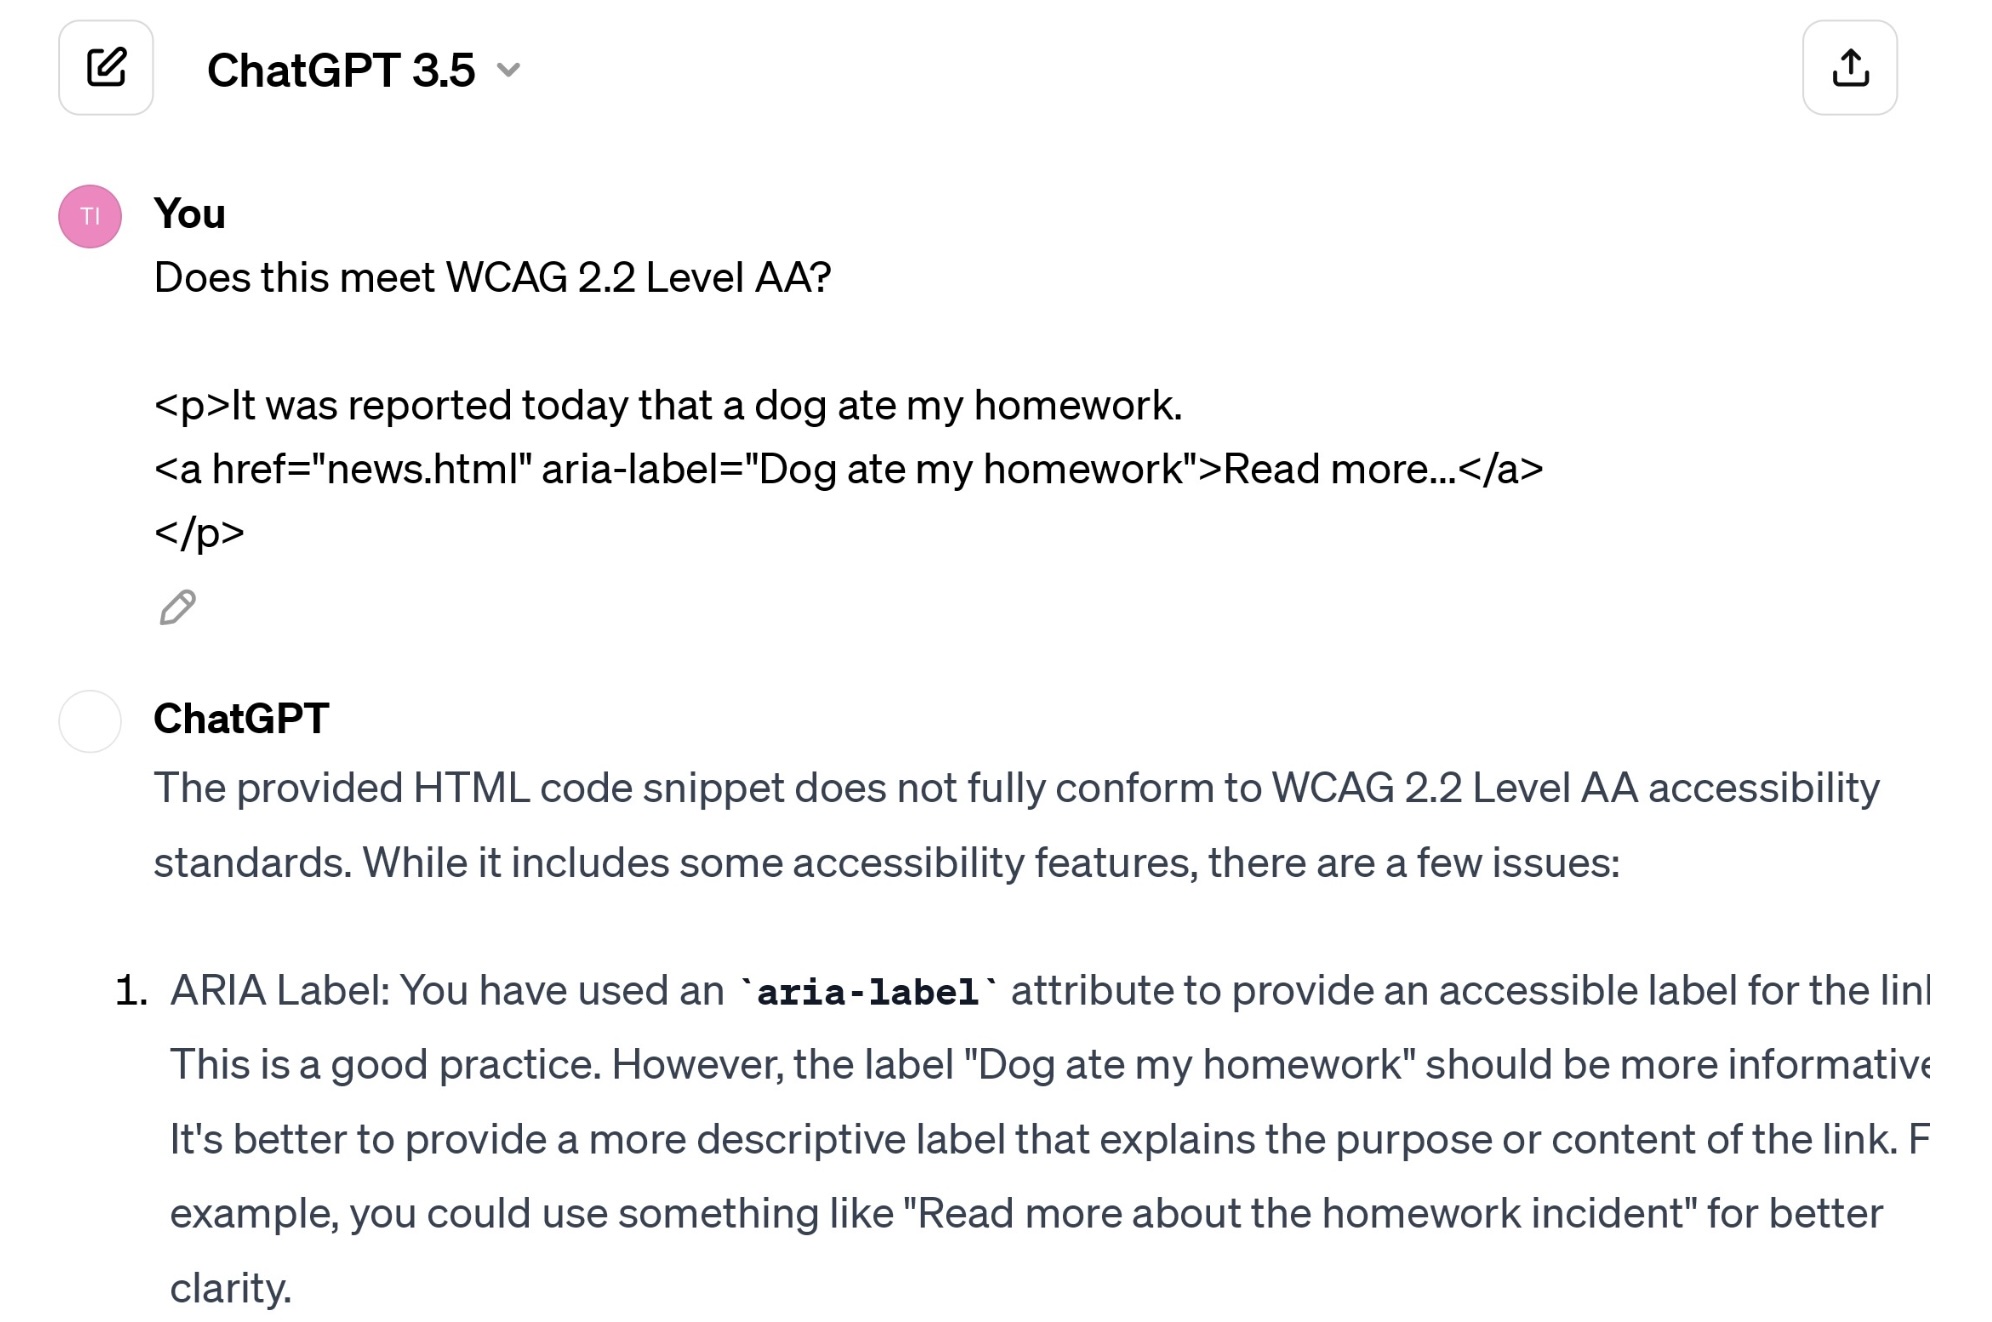 A partial screenshot of ChatGPT's response to the question Does this meet WCAG 2.2 Level AA?